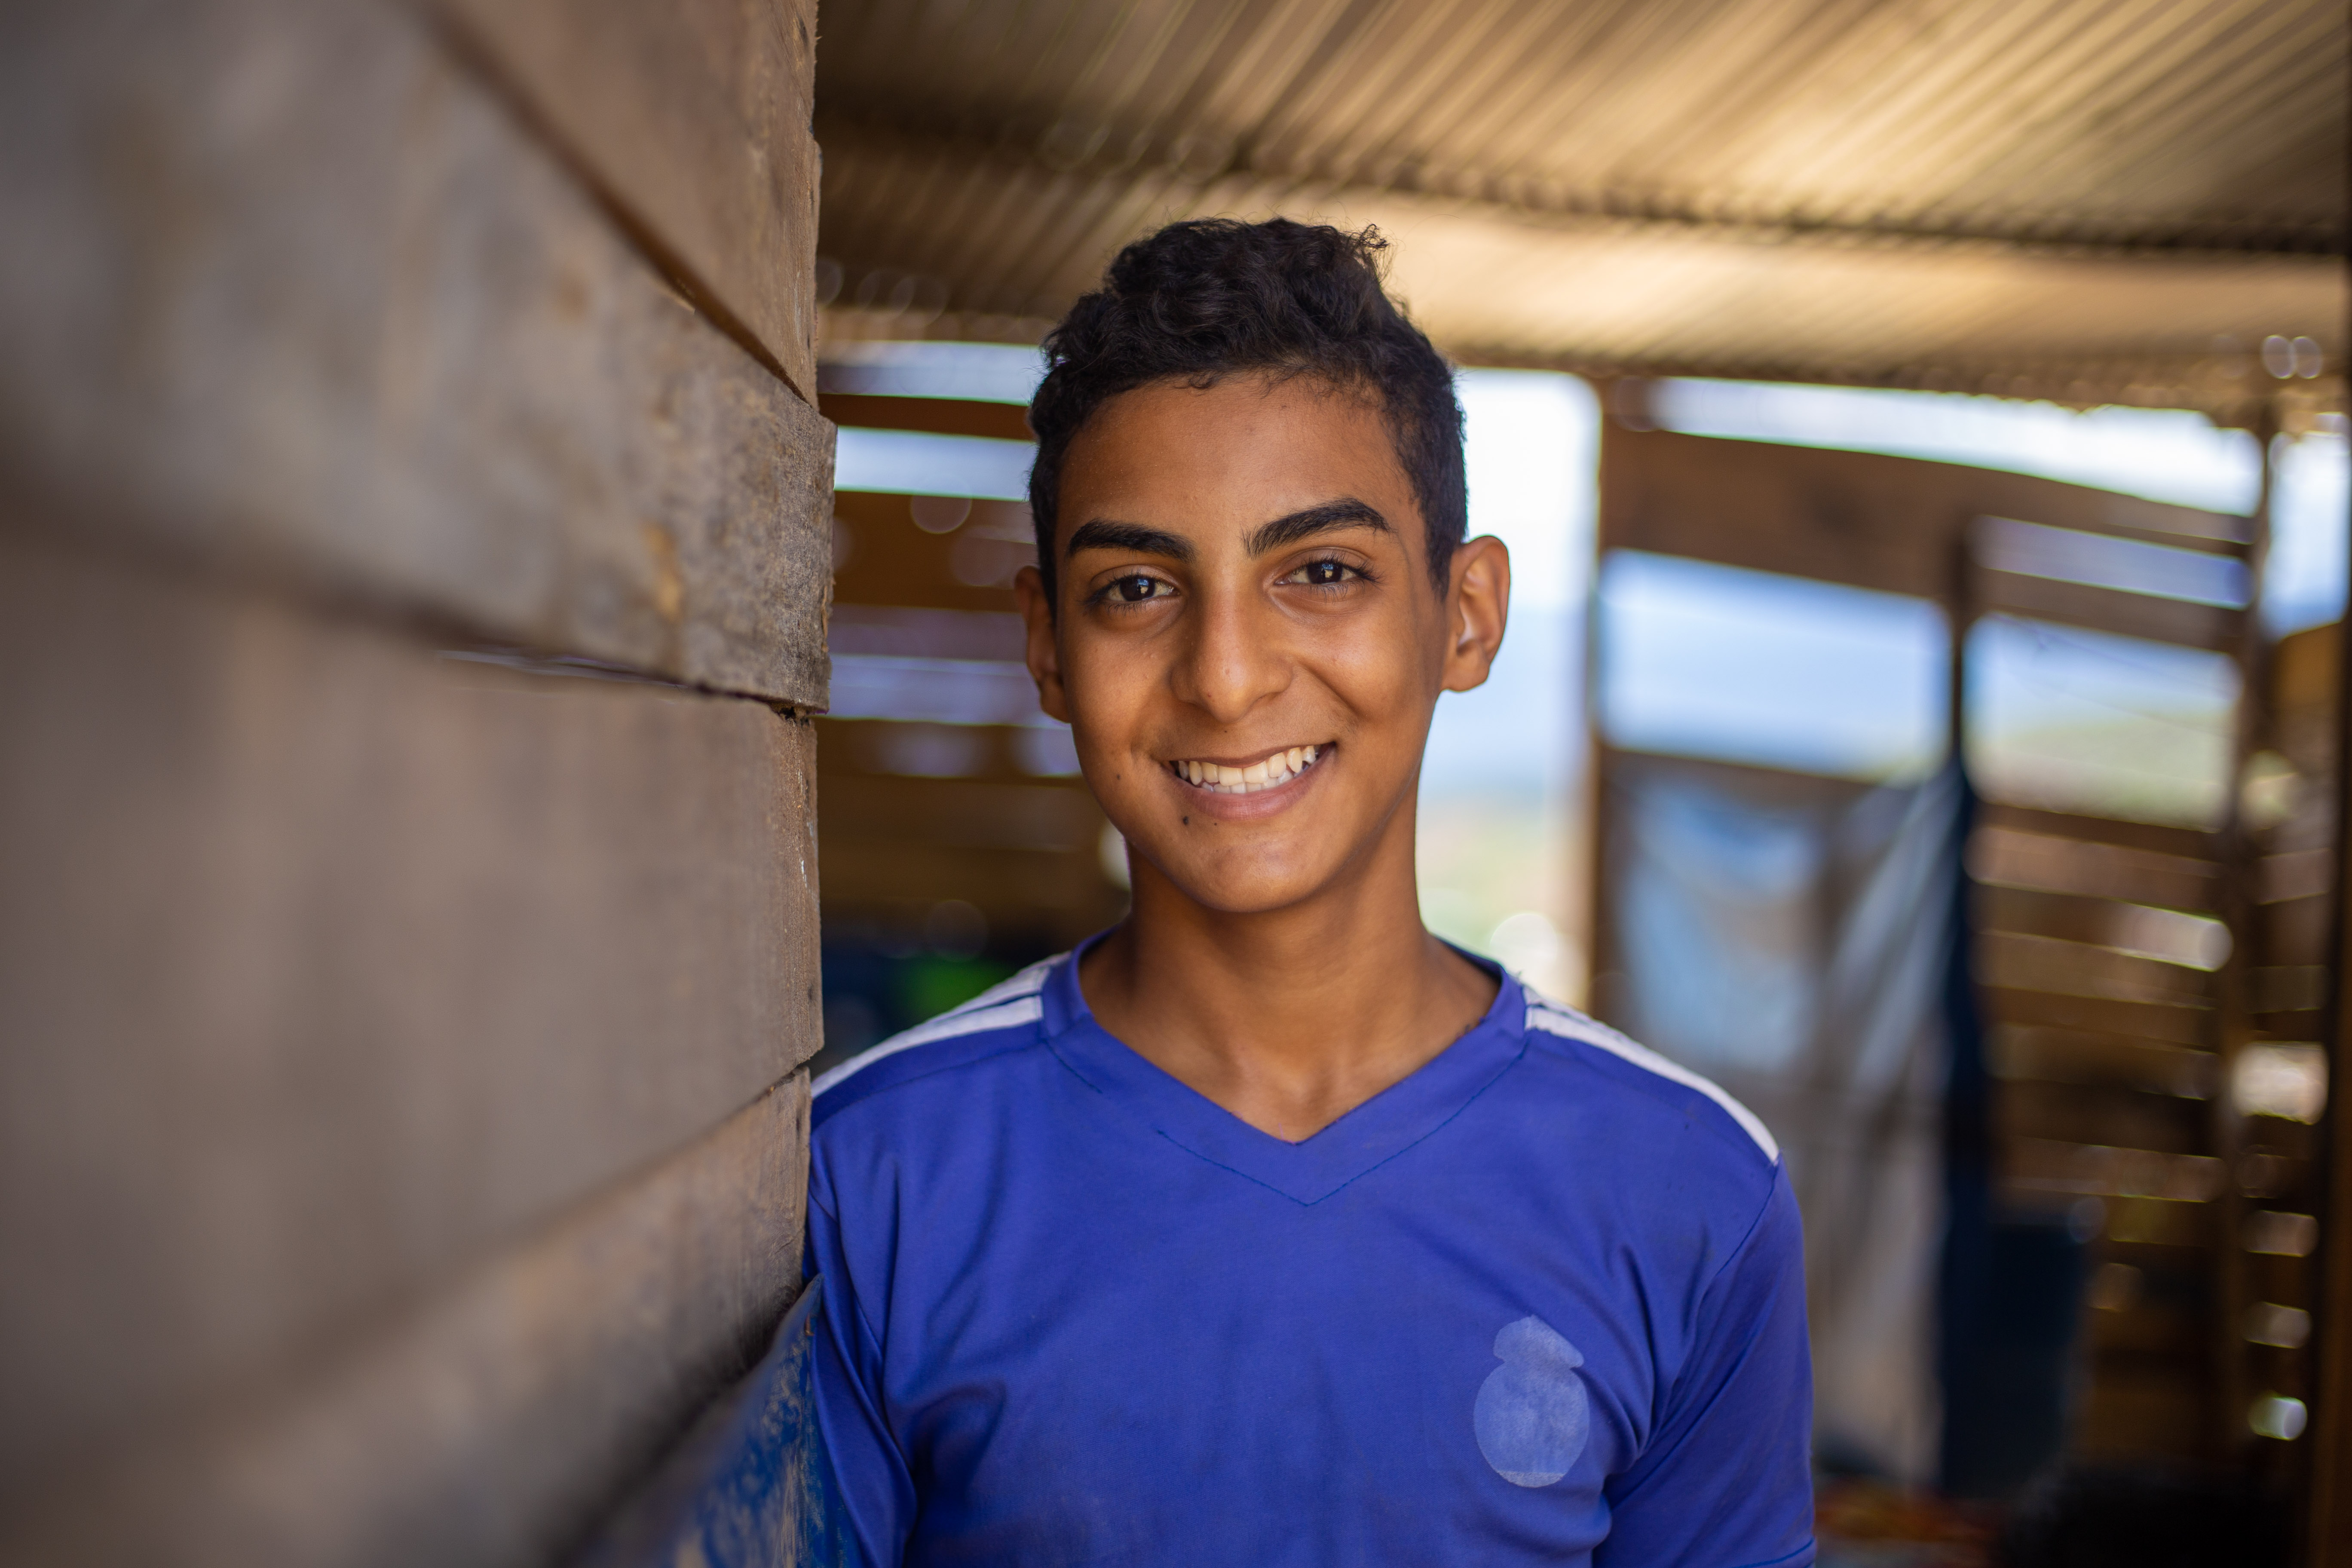 Jesús, a teenage boy smiles at the camera wearing a blue shirt